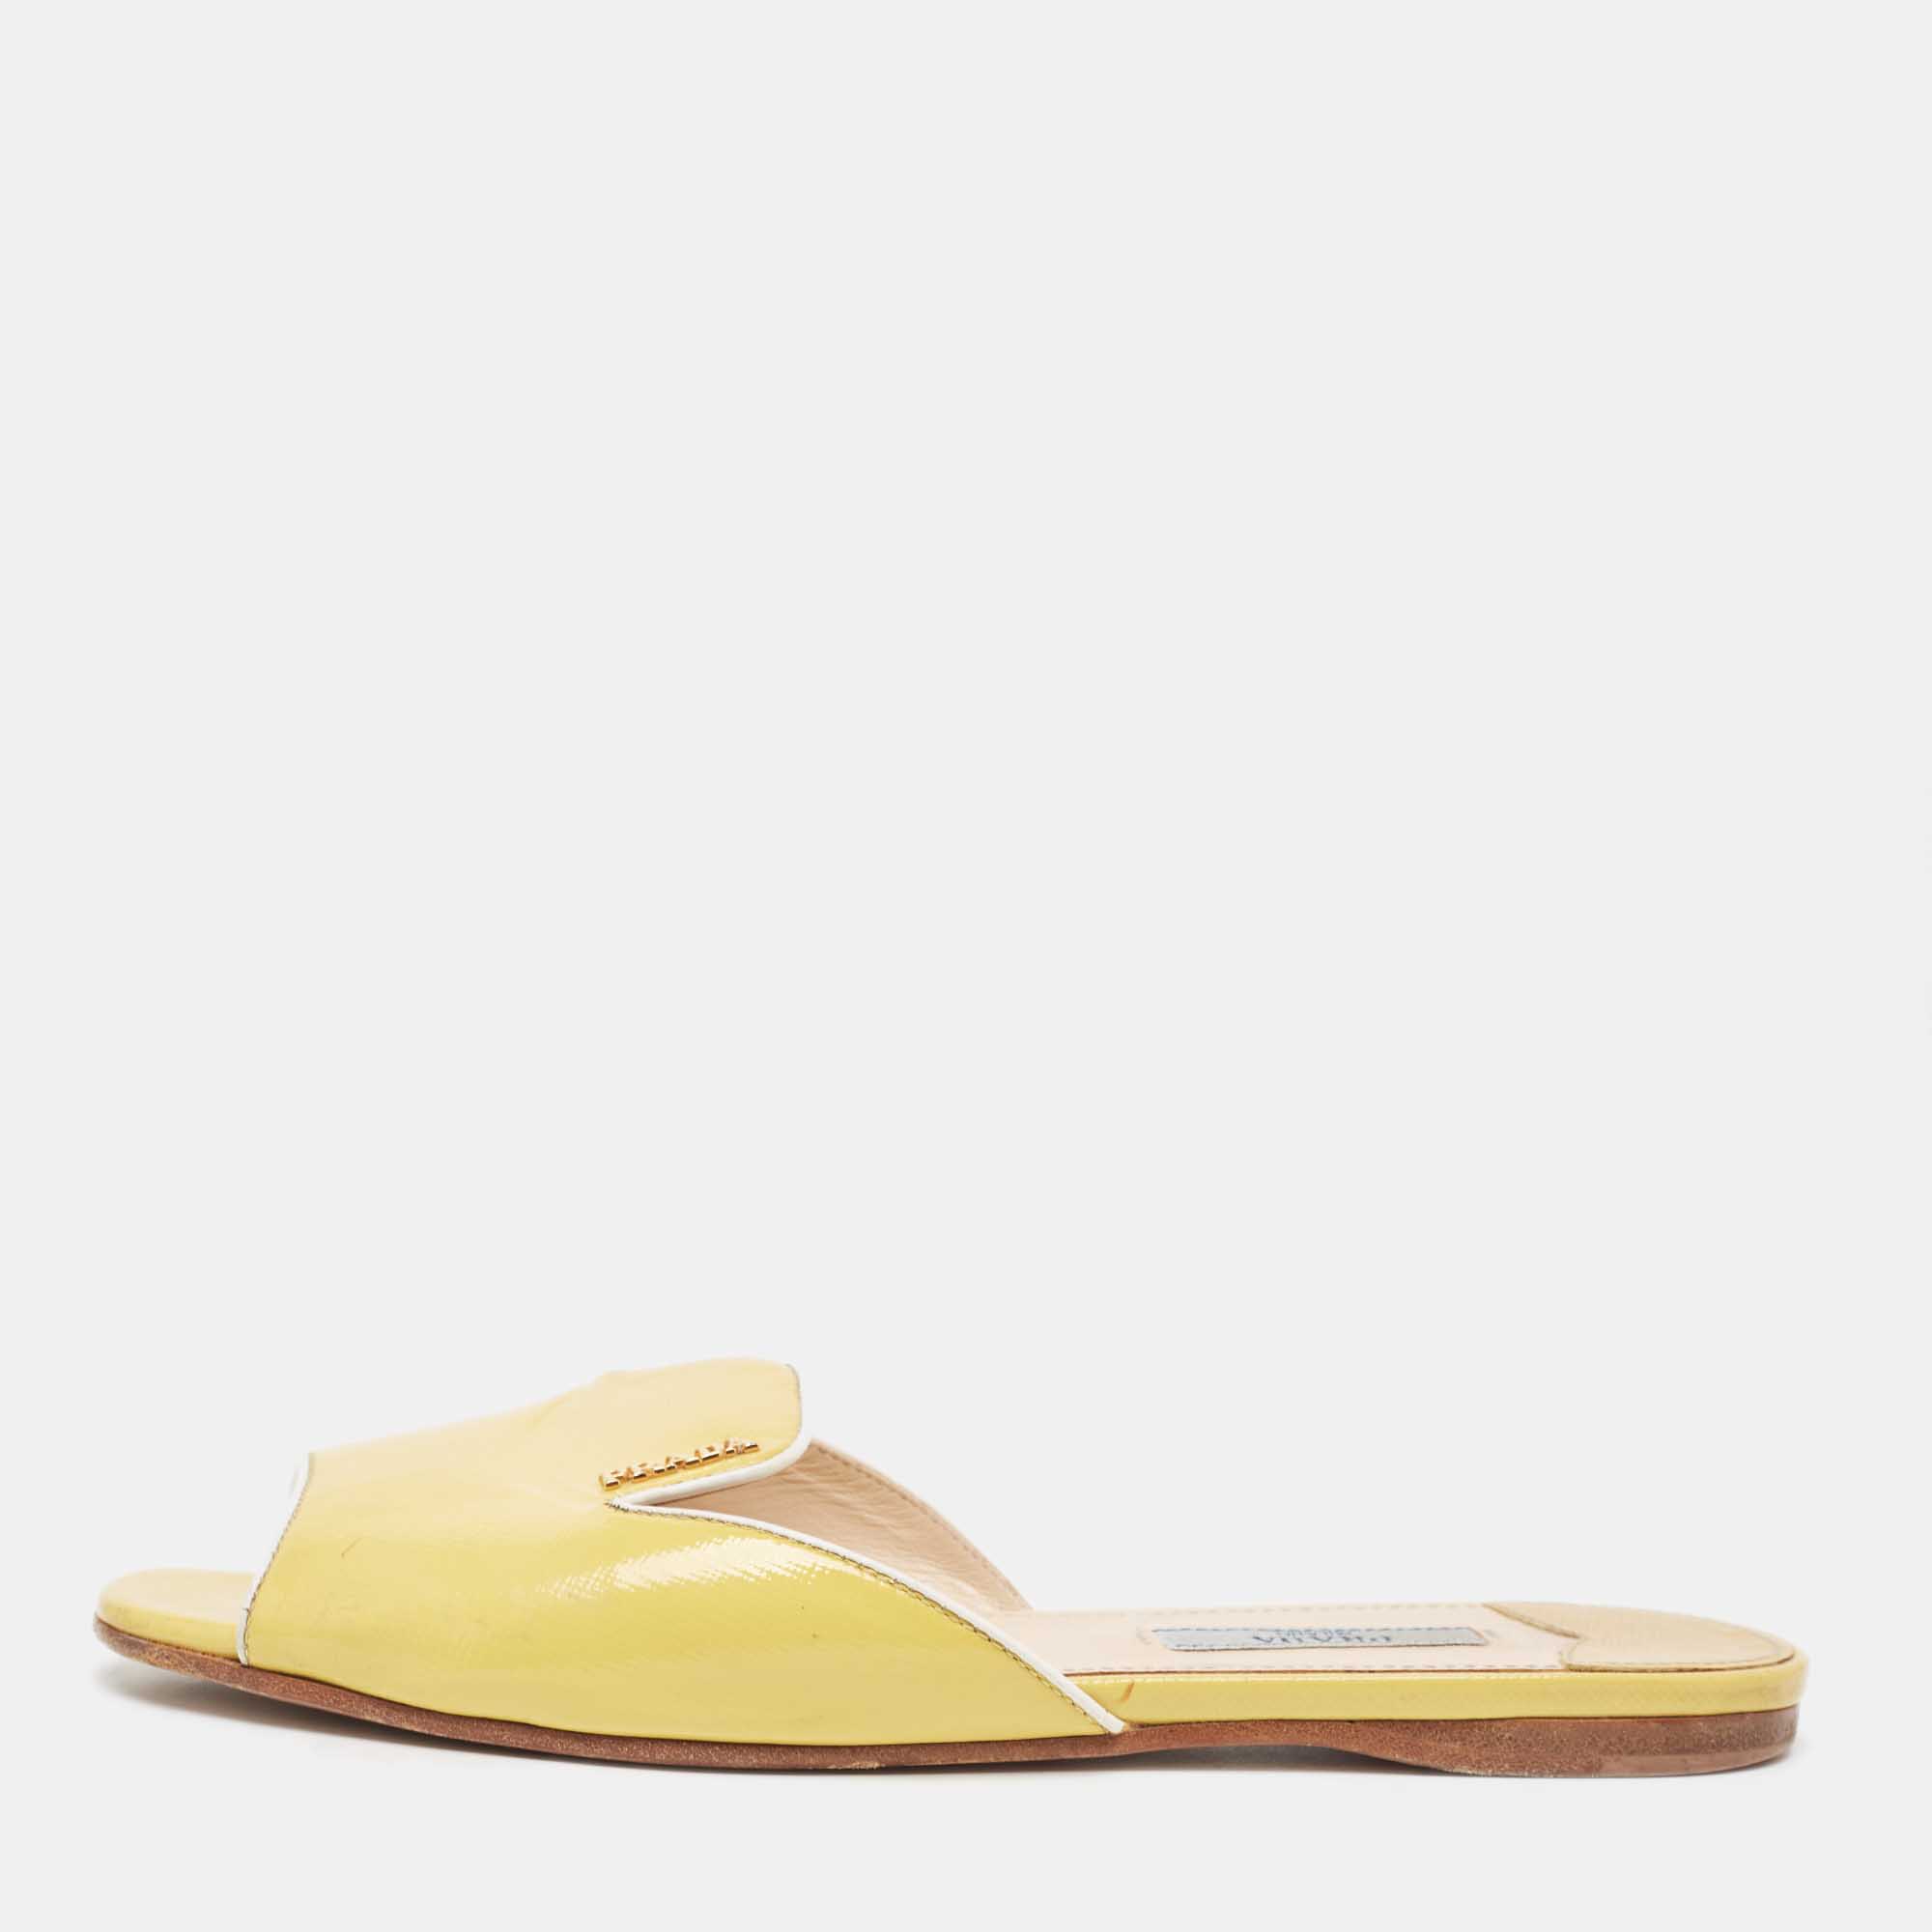 Pre-owned Prada Yellow Saffiano Vernice Leather Flat Slides Size 36